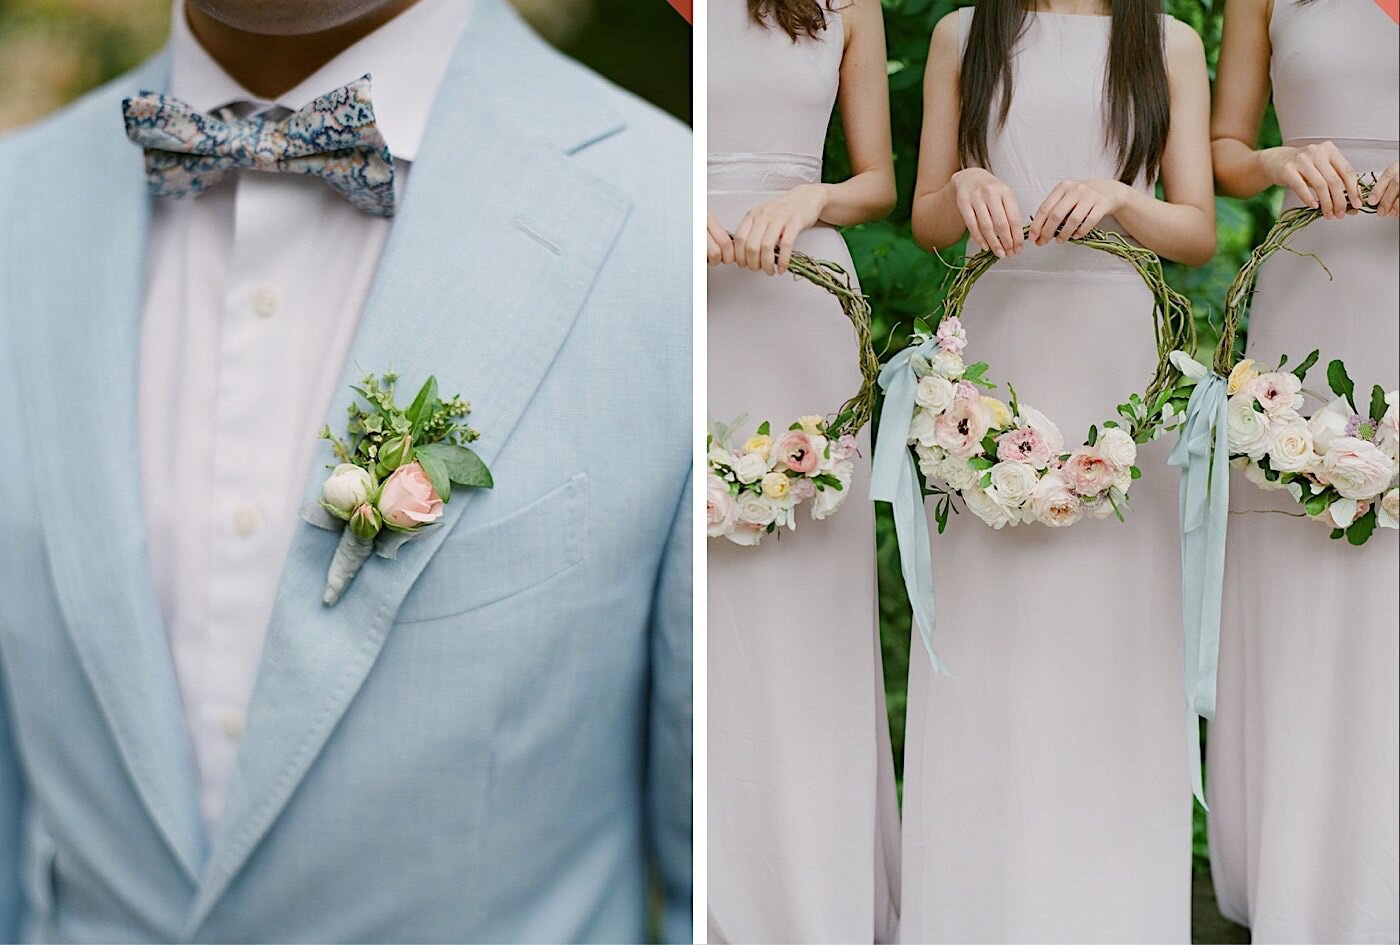 Floral details for the bridal party